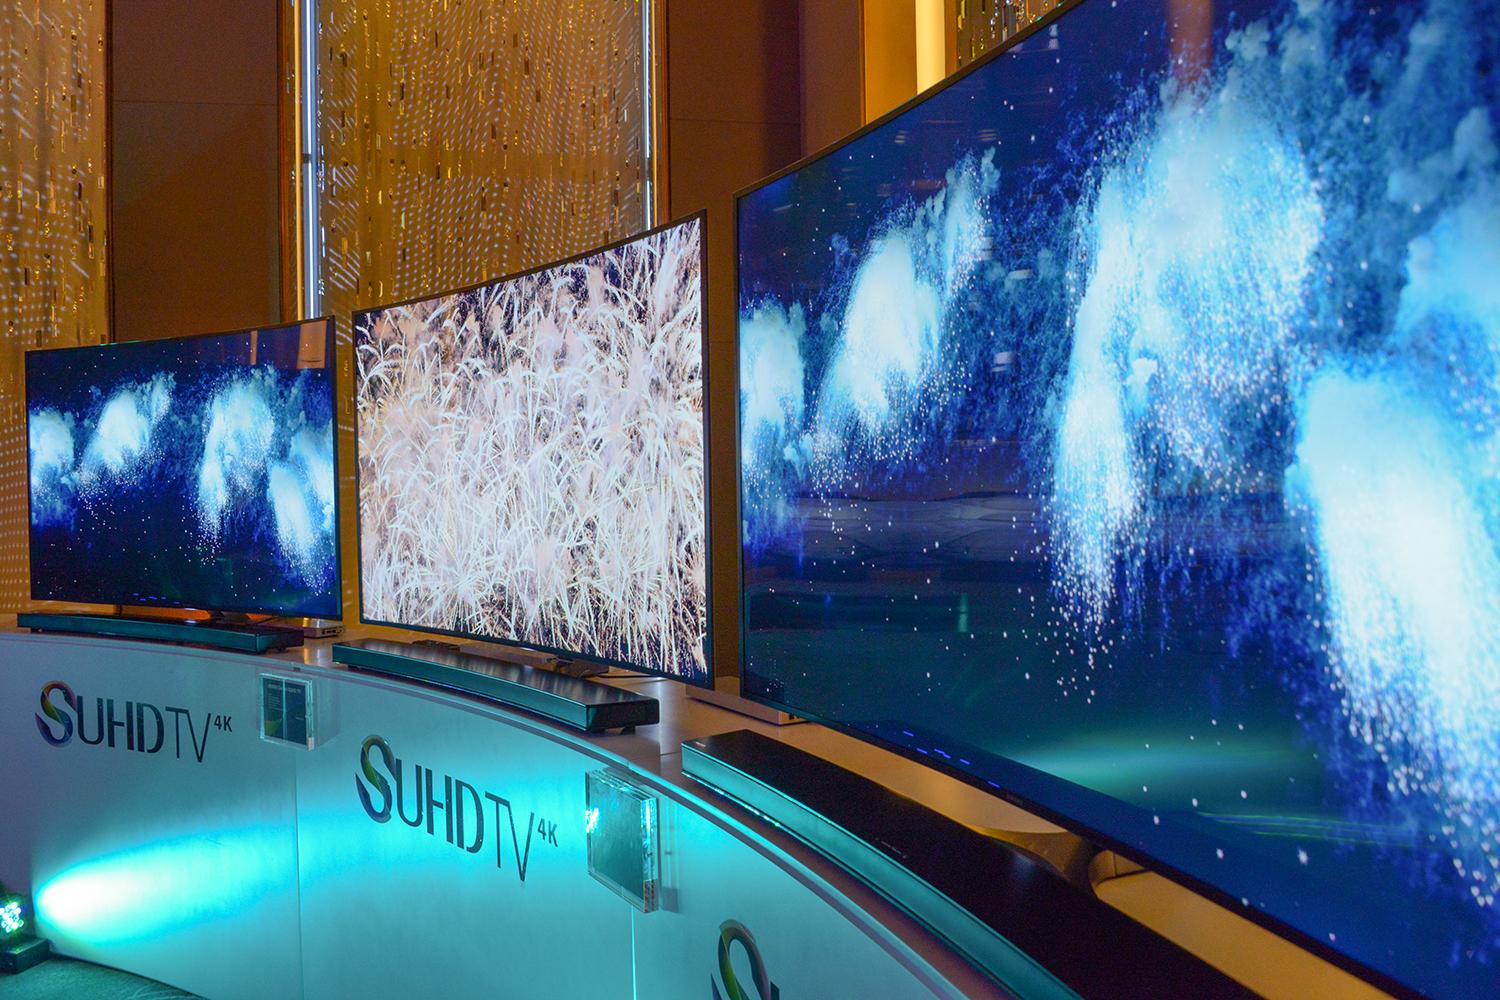 4k adopted faster than hd samsung suhd tv 2015 ny event 1